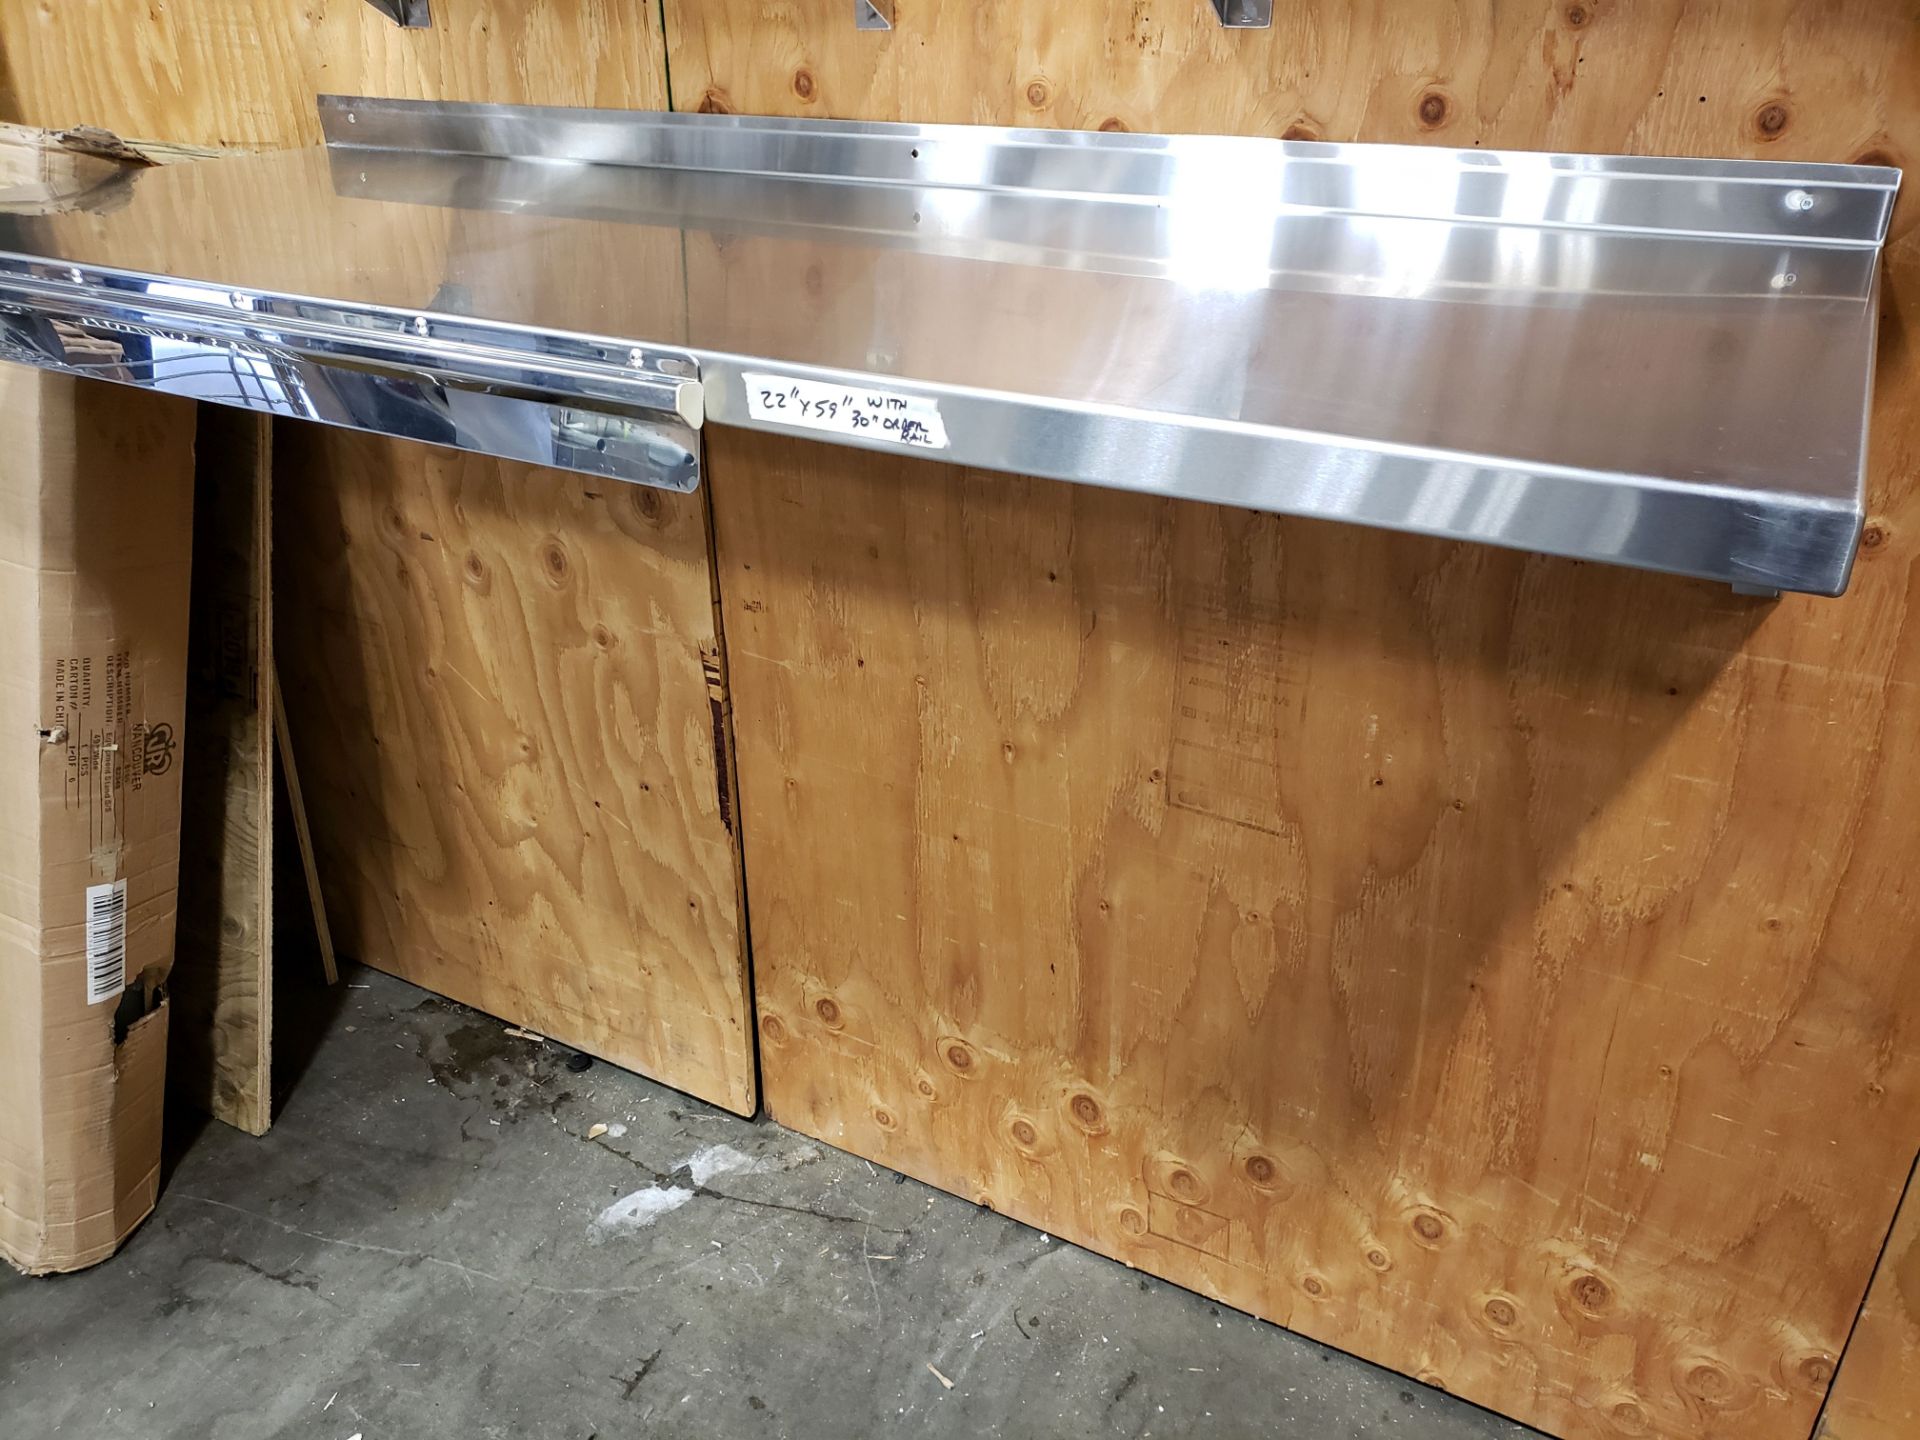 22" x 59" Stainless Steel Wall Shelf with 30" Order Rail